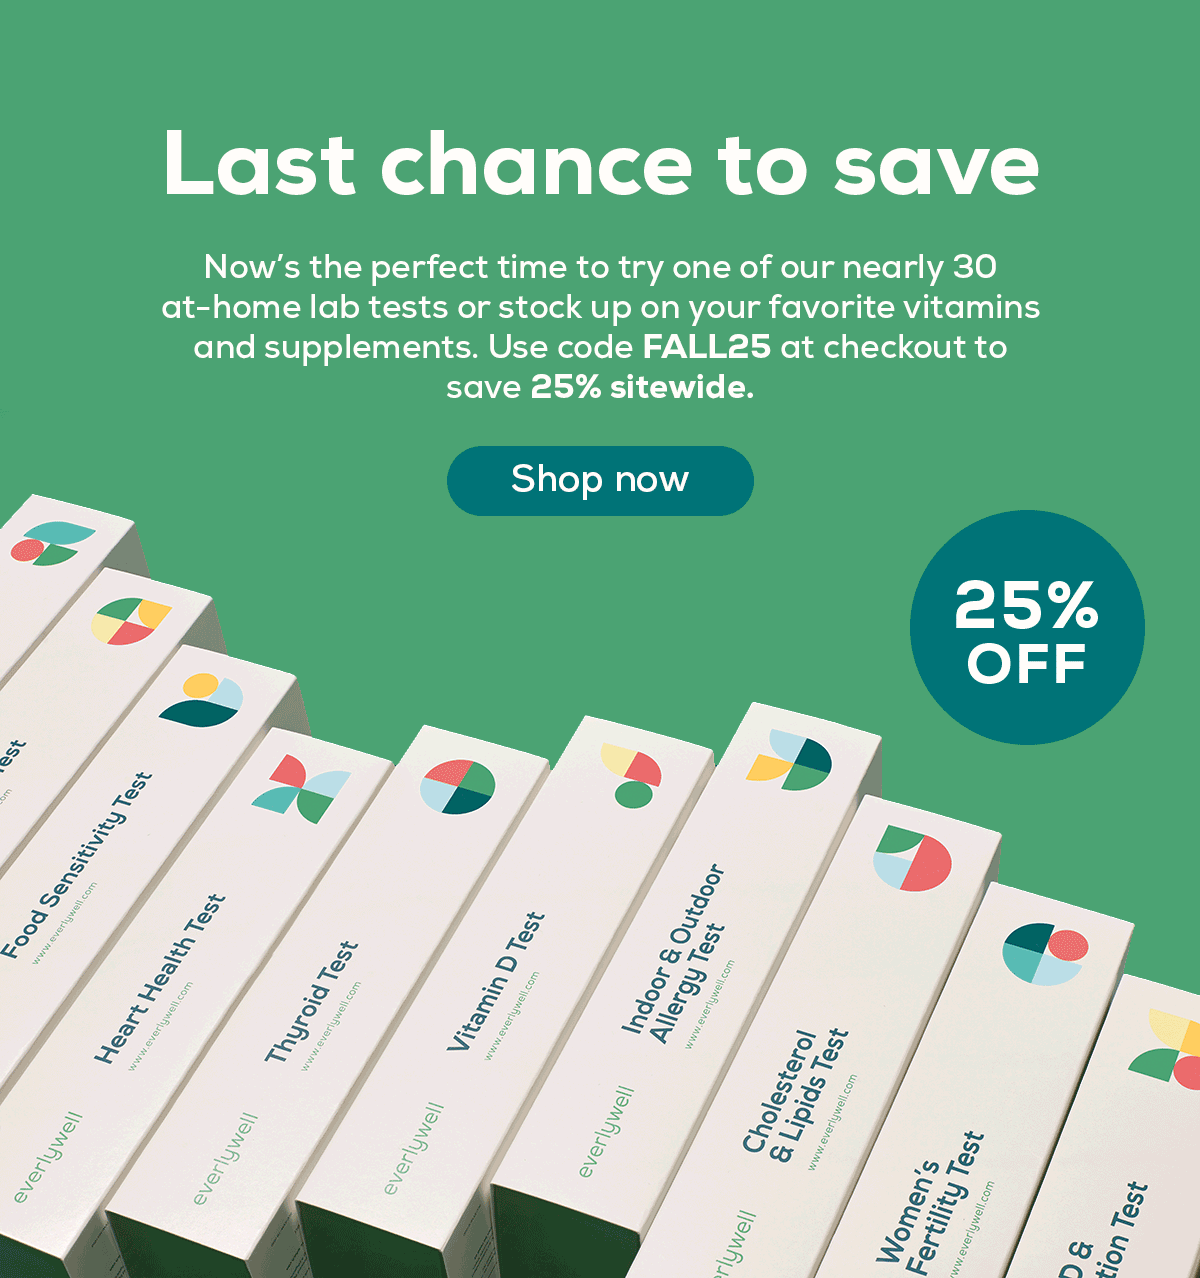 Nows the perfect time to try one of our nearly 30 at-home lab tests or stock up on your favorite vitamins and supplements. Use code FALL25 at checkout to save 25% sitewide. | Shop now 